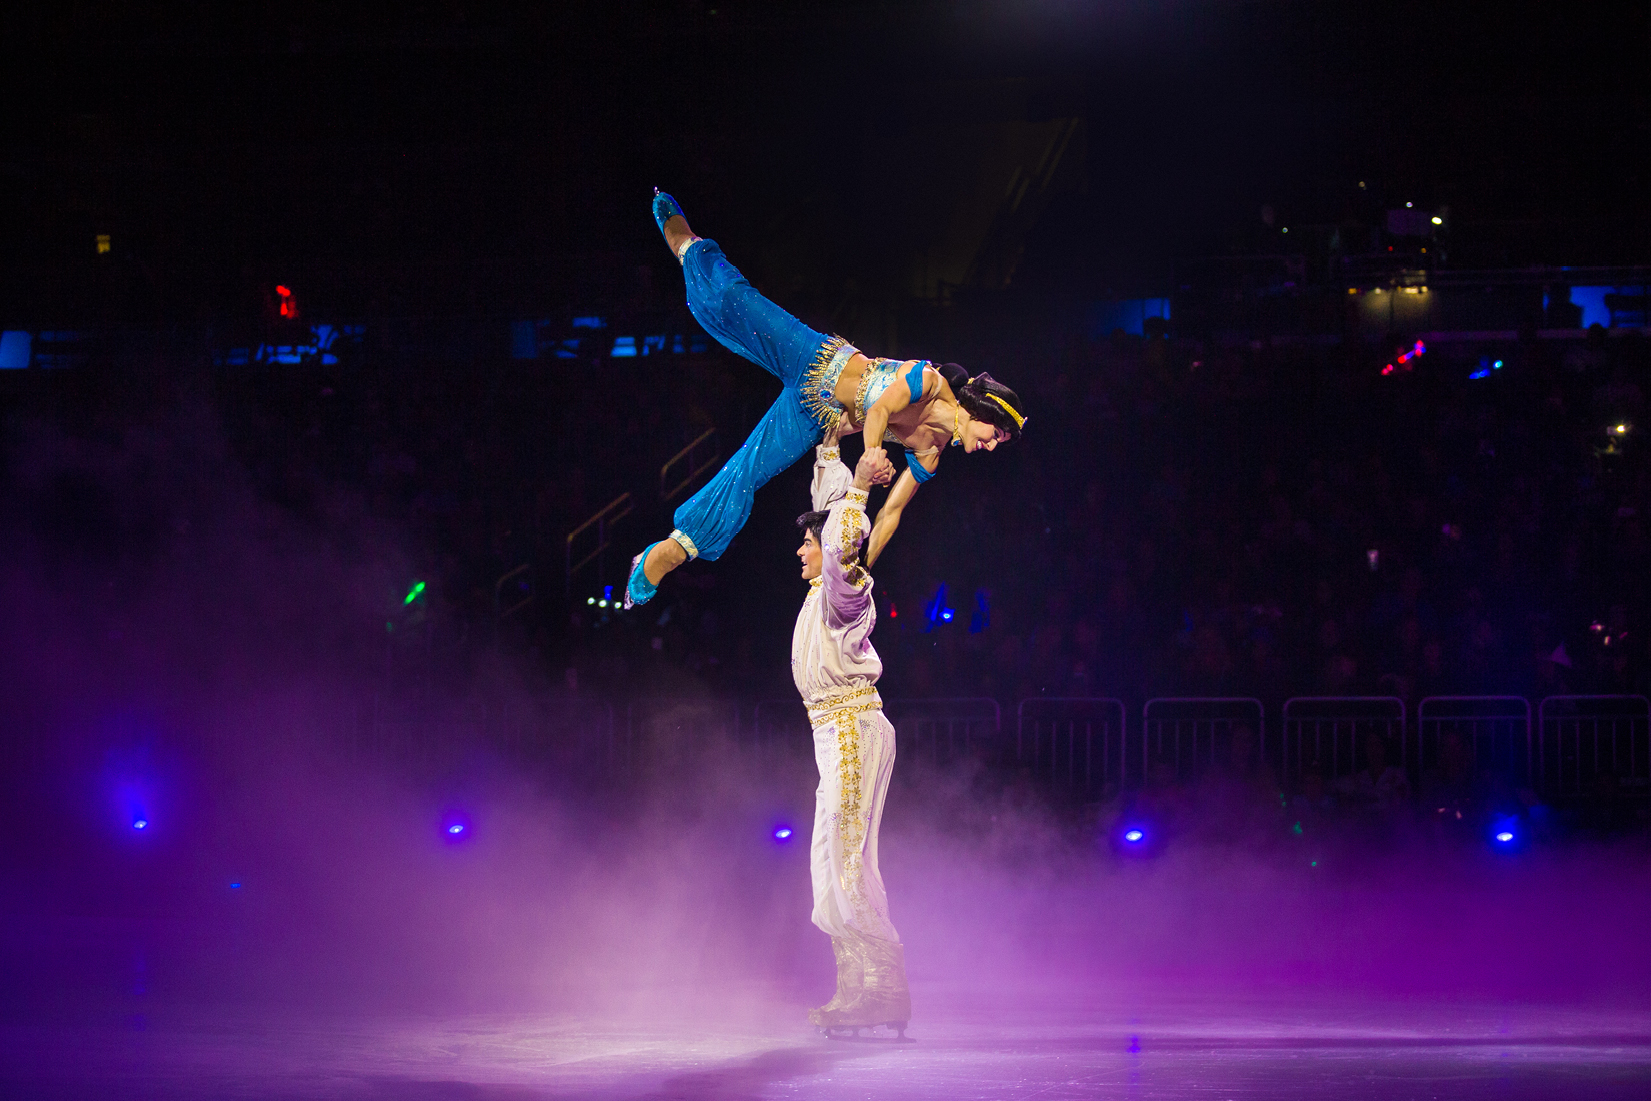 Disney on Ice returns and coming to a city near you!